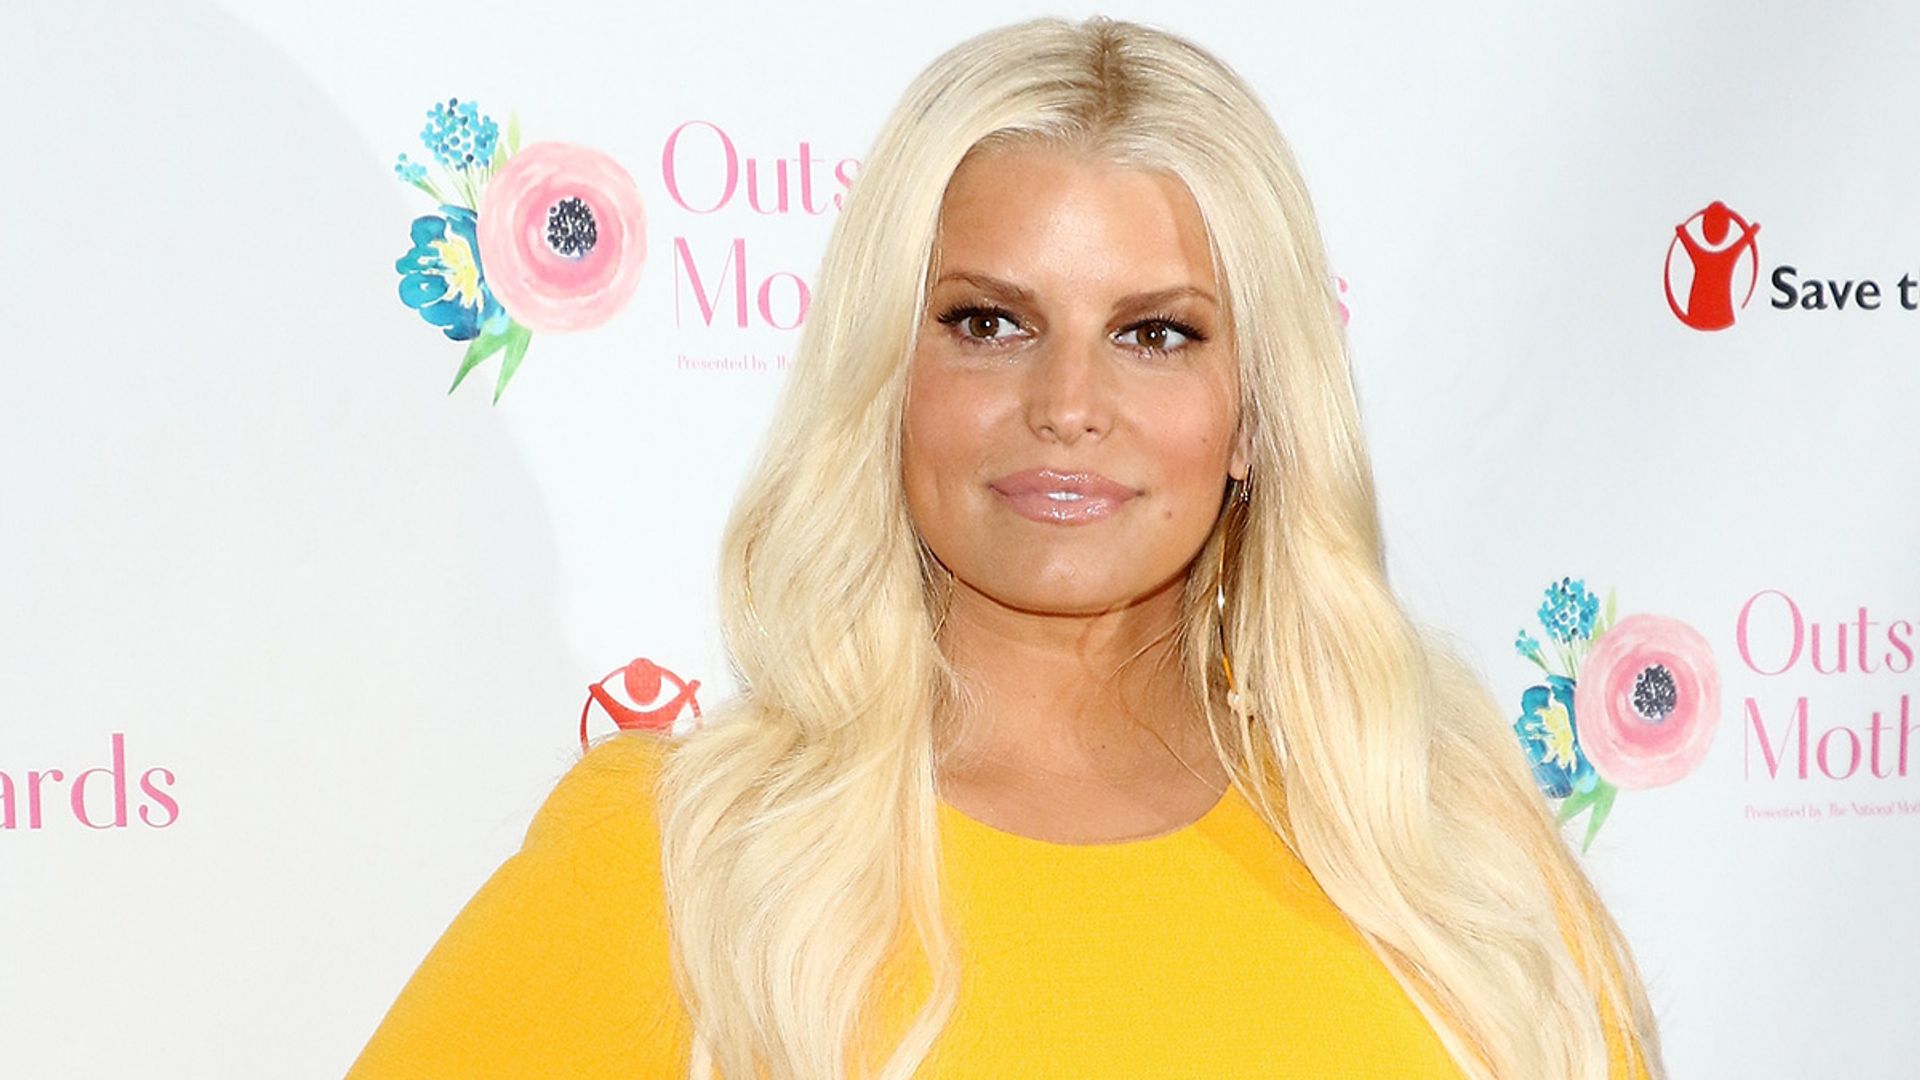 Jessica Simpson steals the show in sensational looks for new fashion range